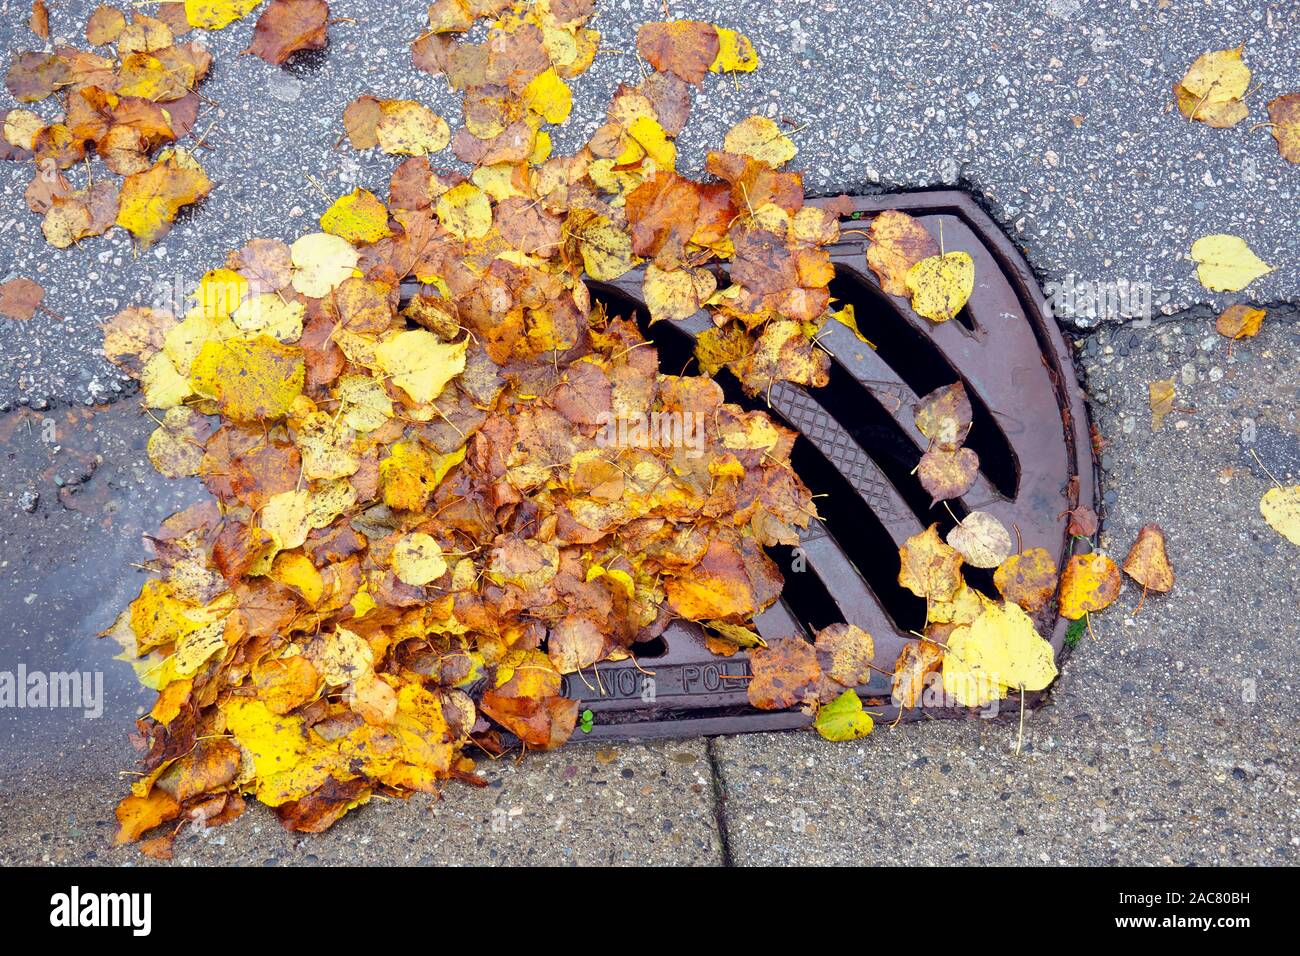 Fallen yellow leaves clogging a storm drain on a residential street. Stock Photo